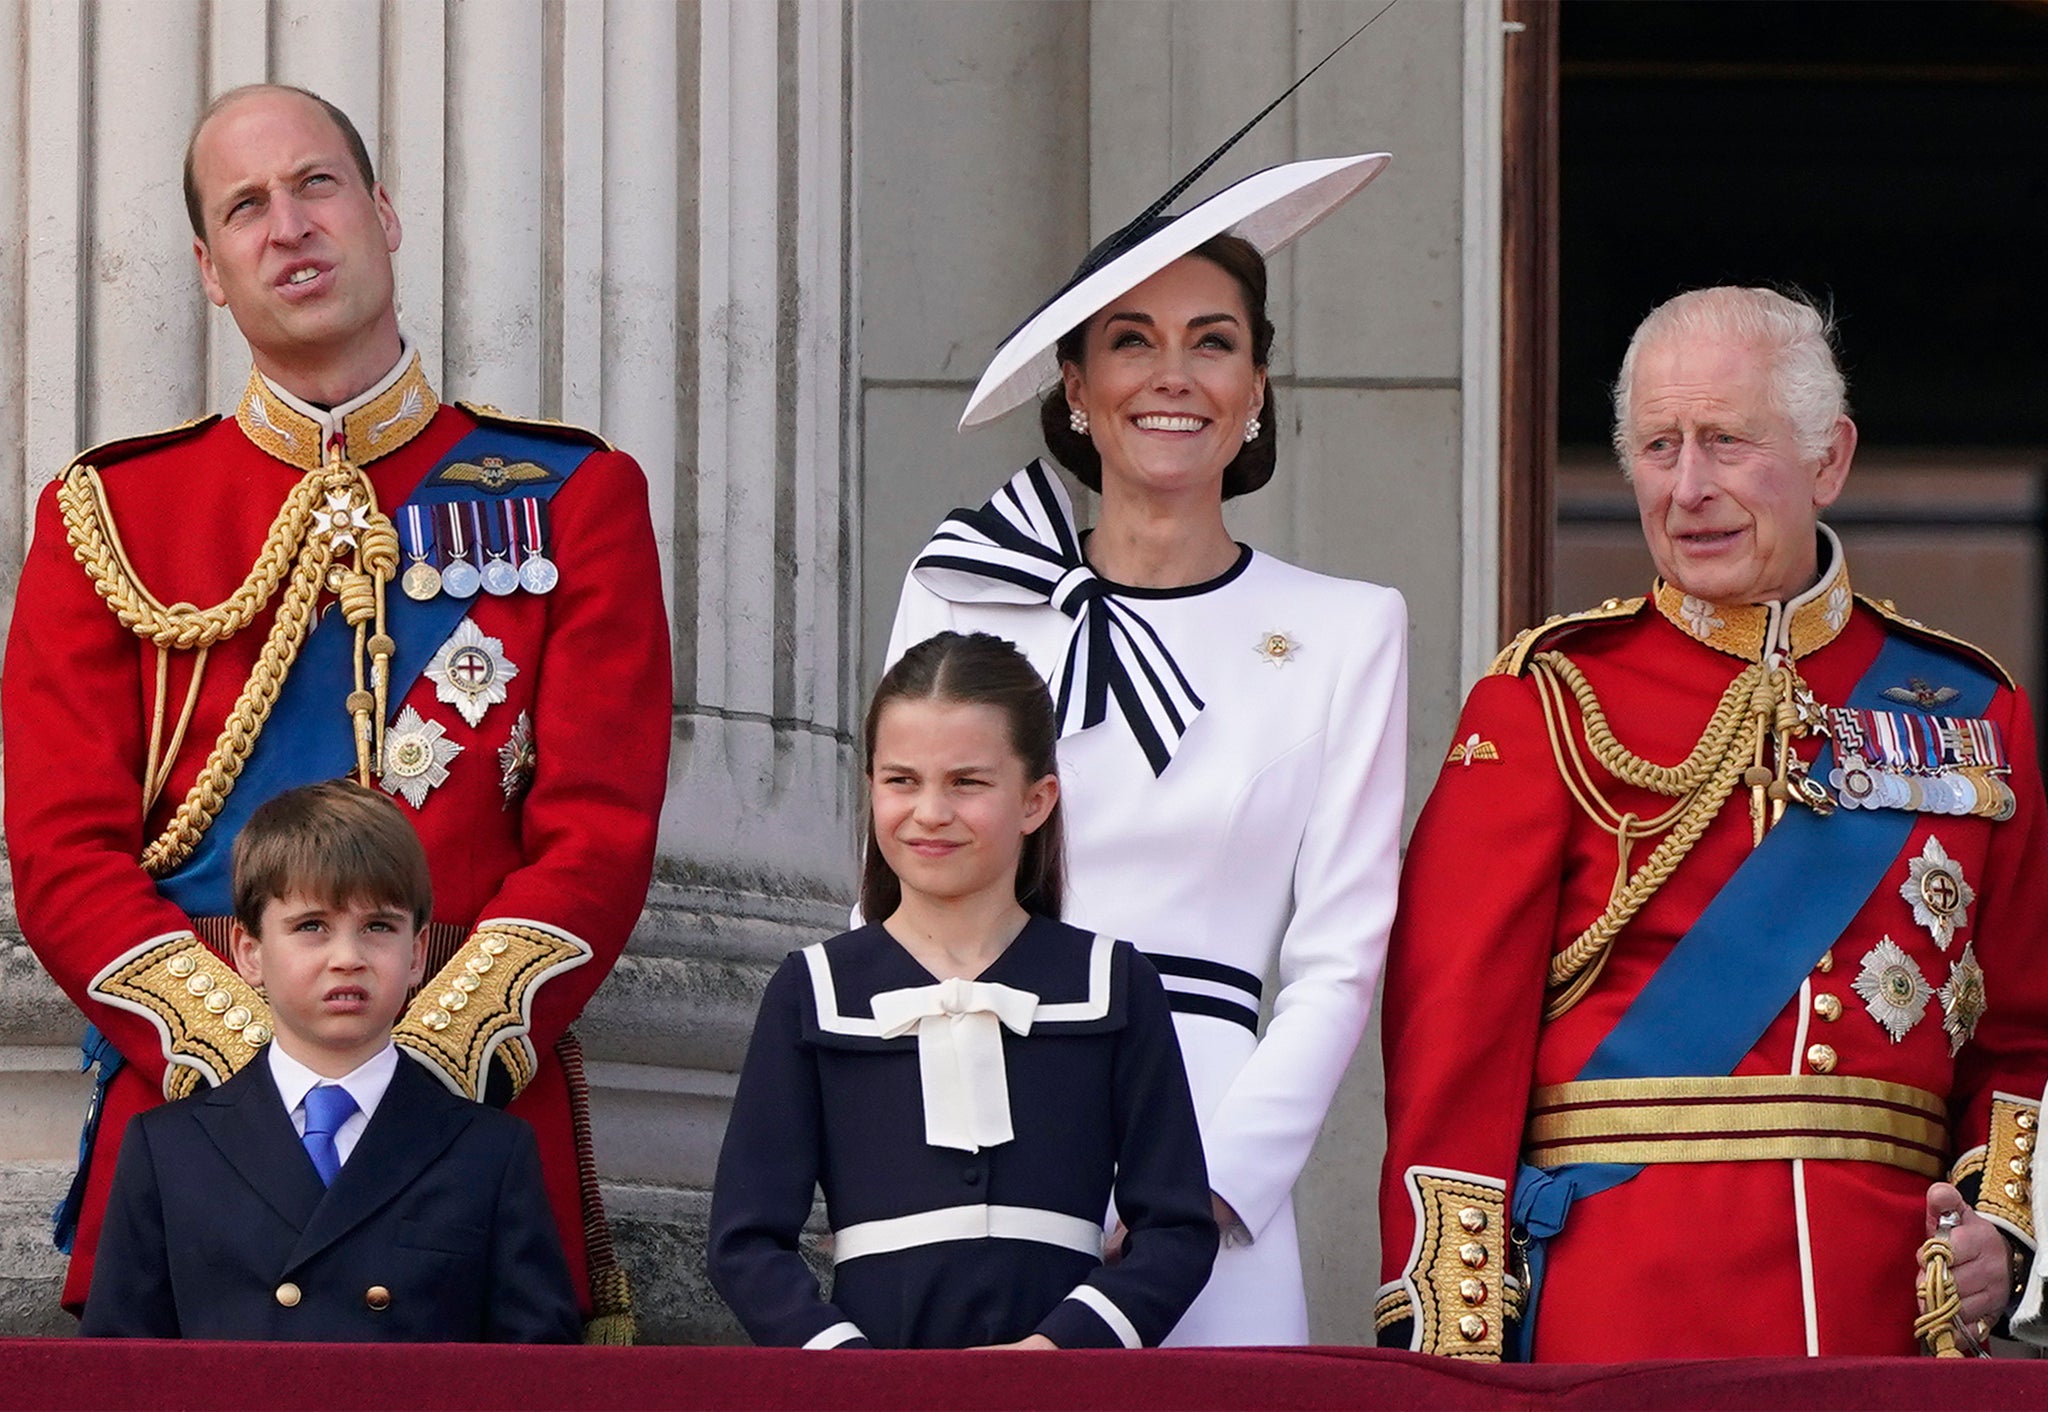 The Princess of Wales dazzled next to the King on the balcony of Buckingham Palace